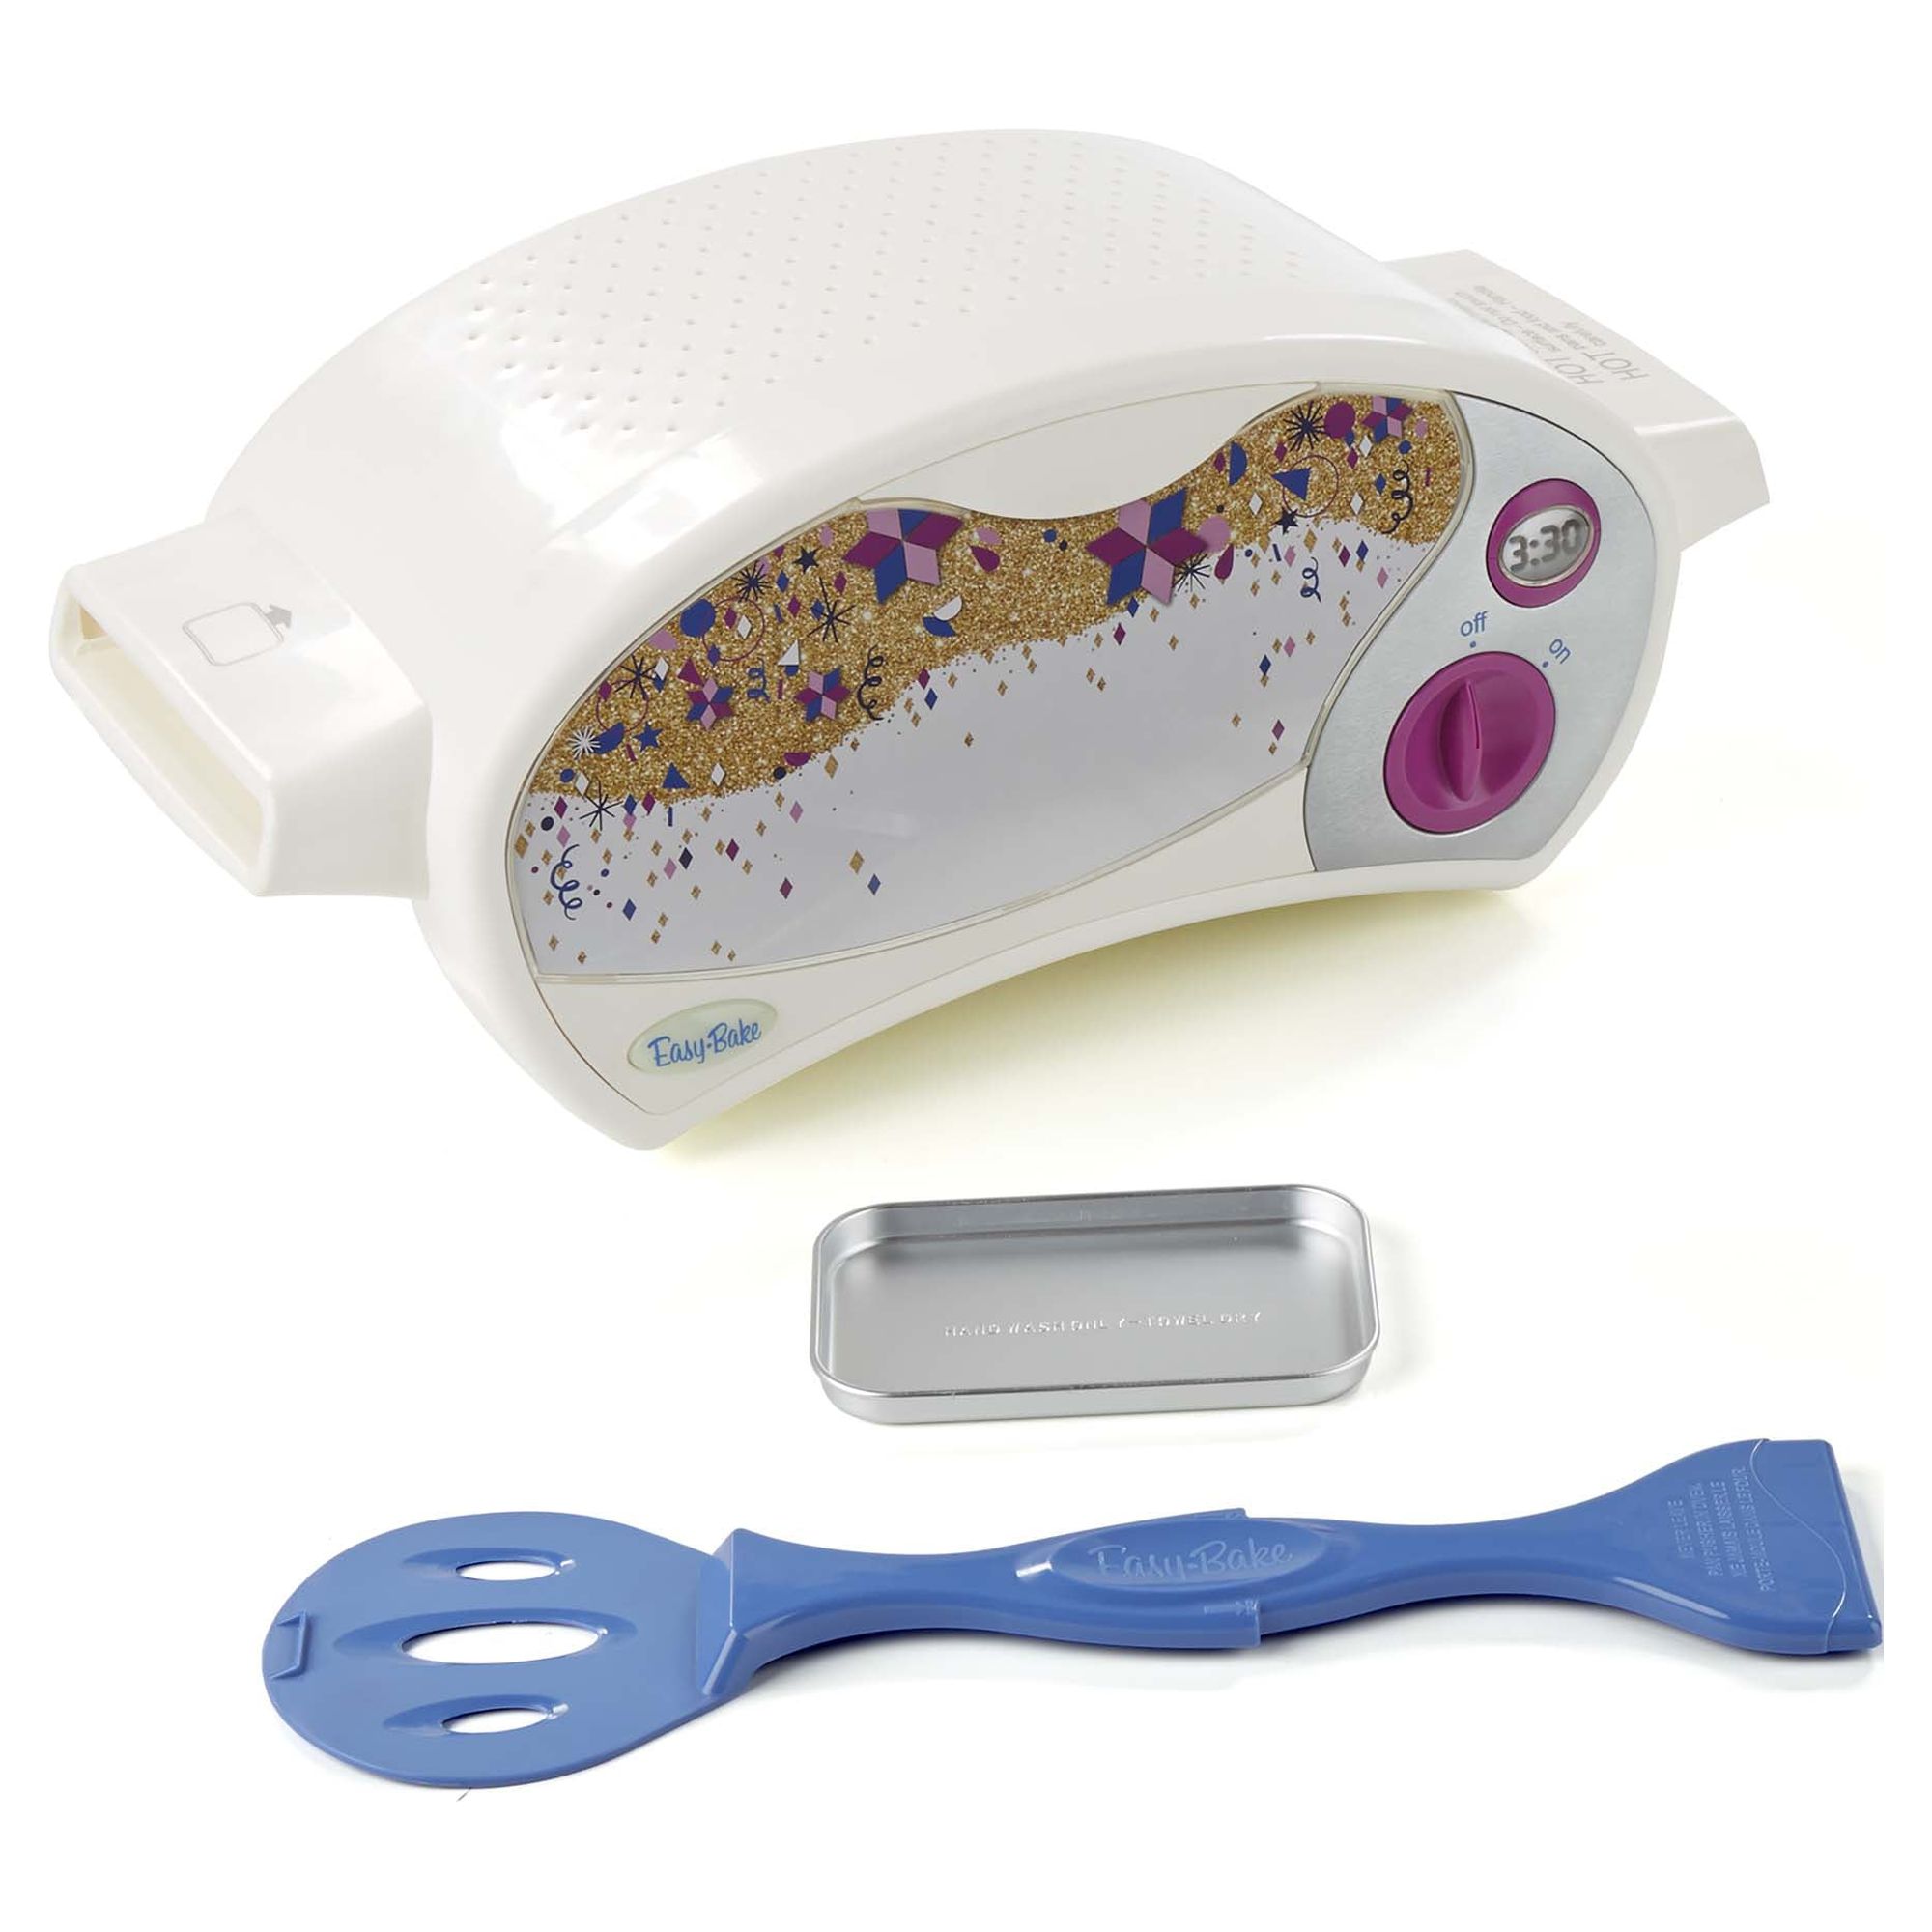 Easy-Bake Ultimate Oven Toy, Baking Star Edition, for Kids Ages 8 and Up - image 3 of 9